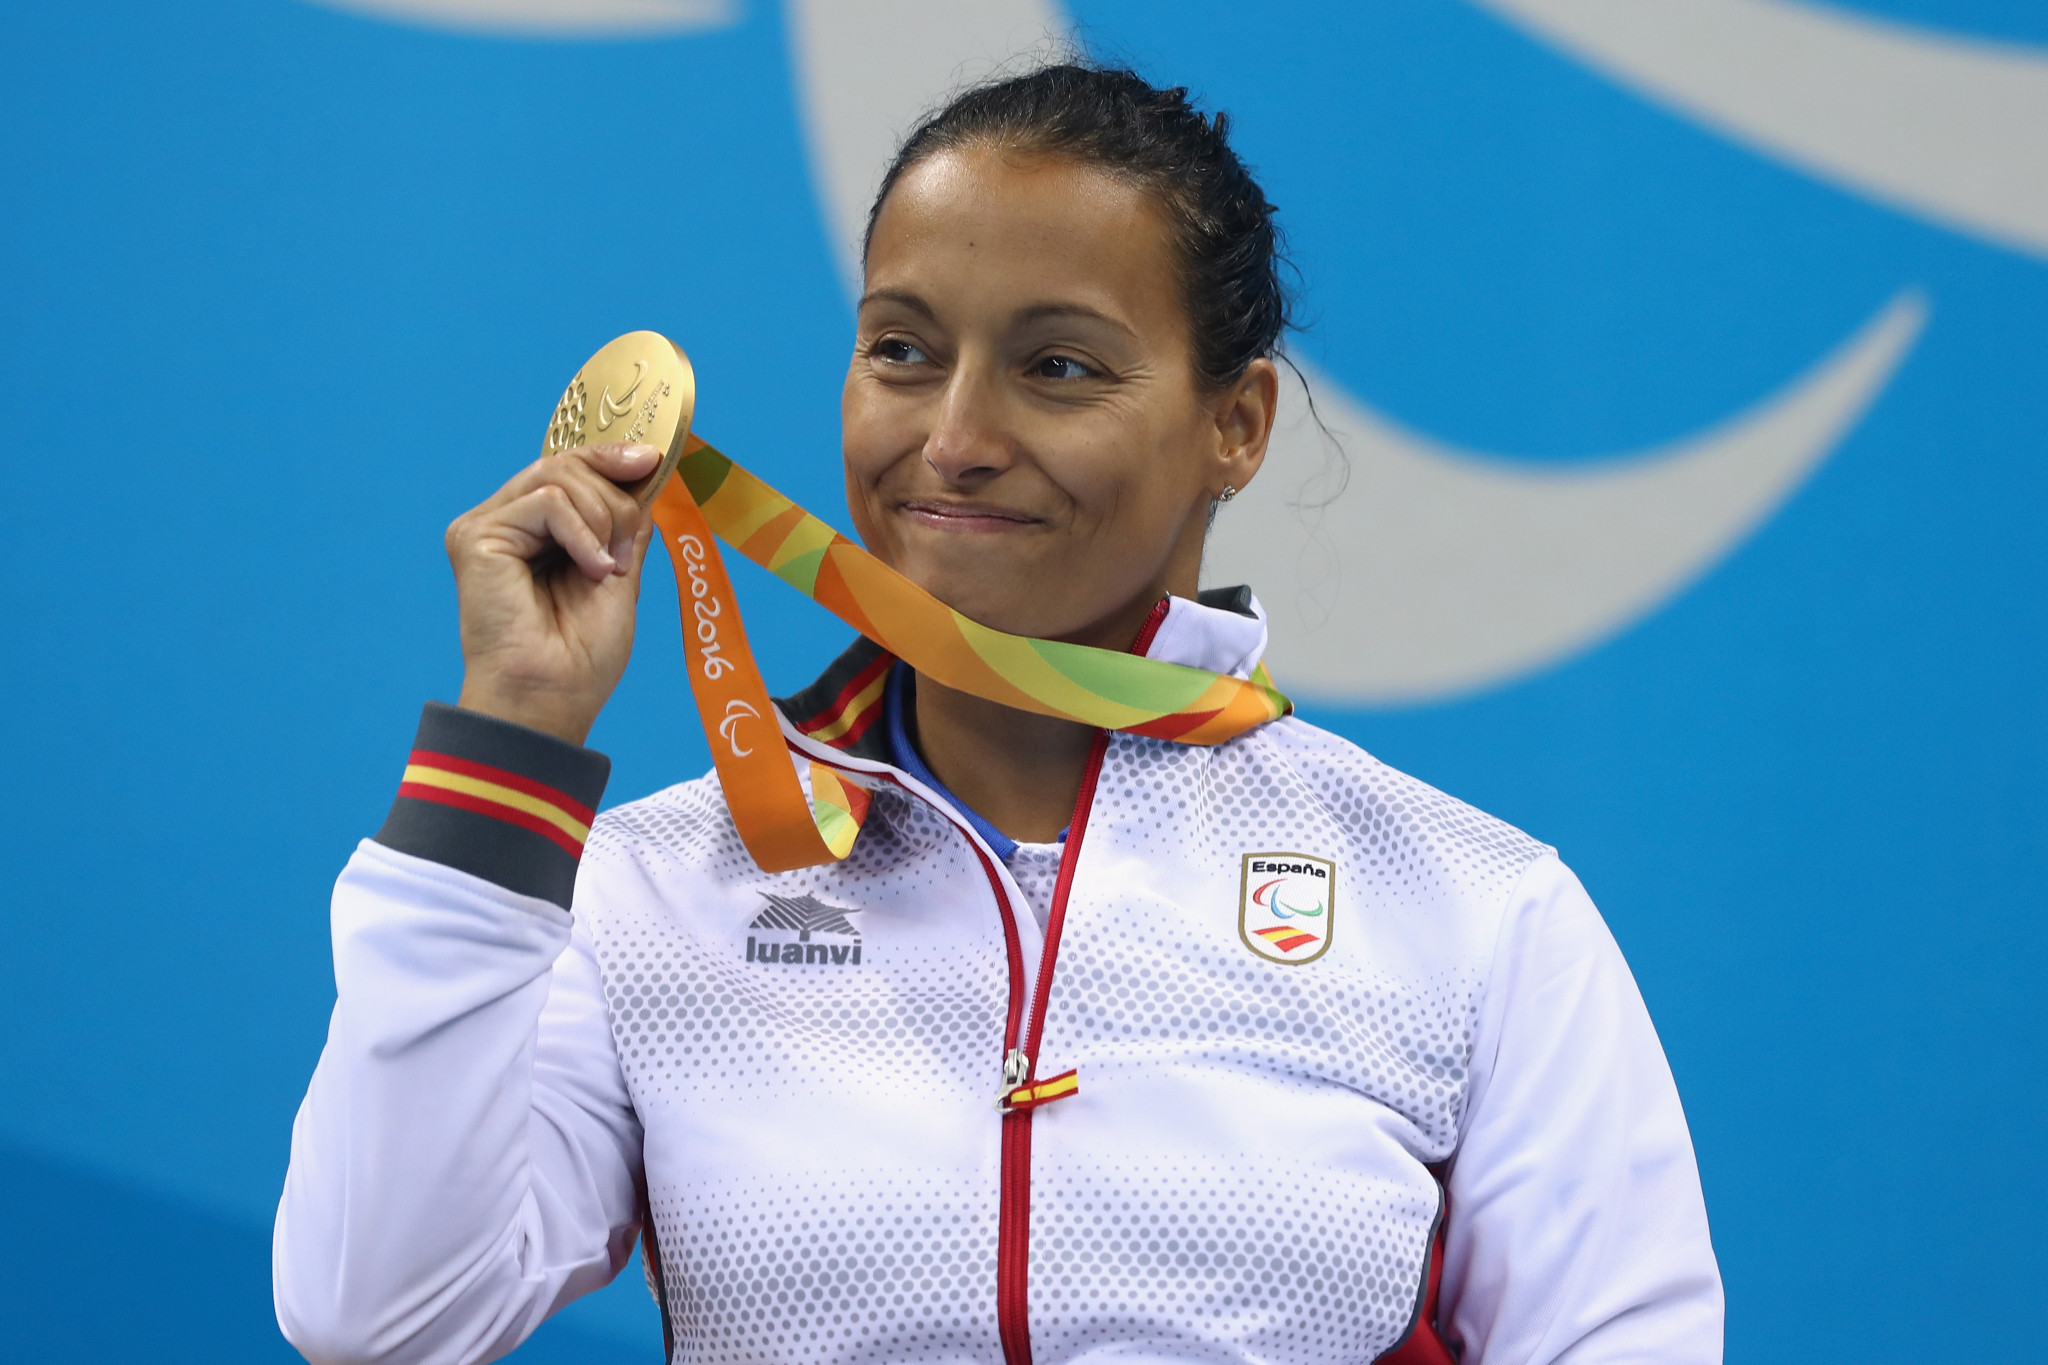 An image of Spain's seven-time Paralympic swimming champion Teresa Perales features on the bus ©Getty Images